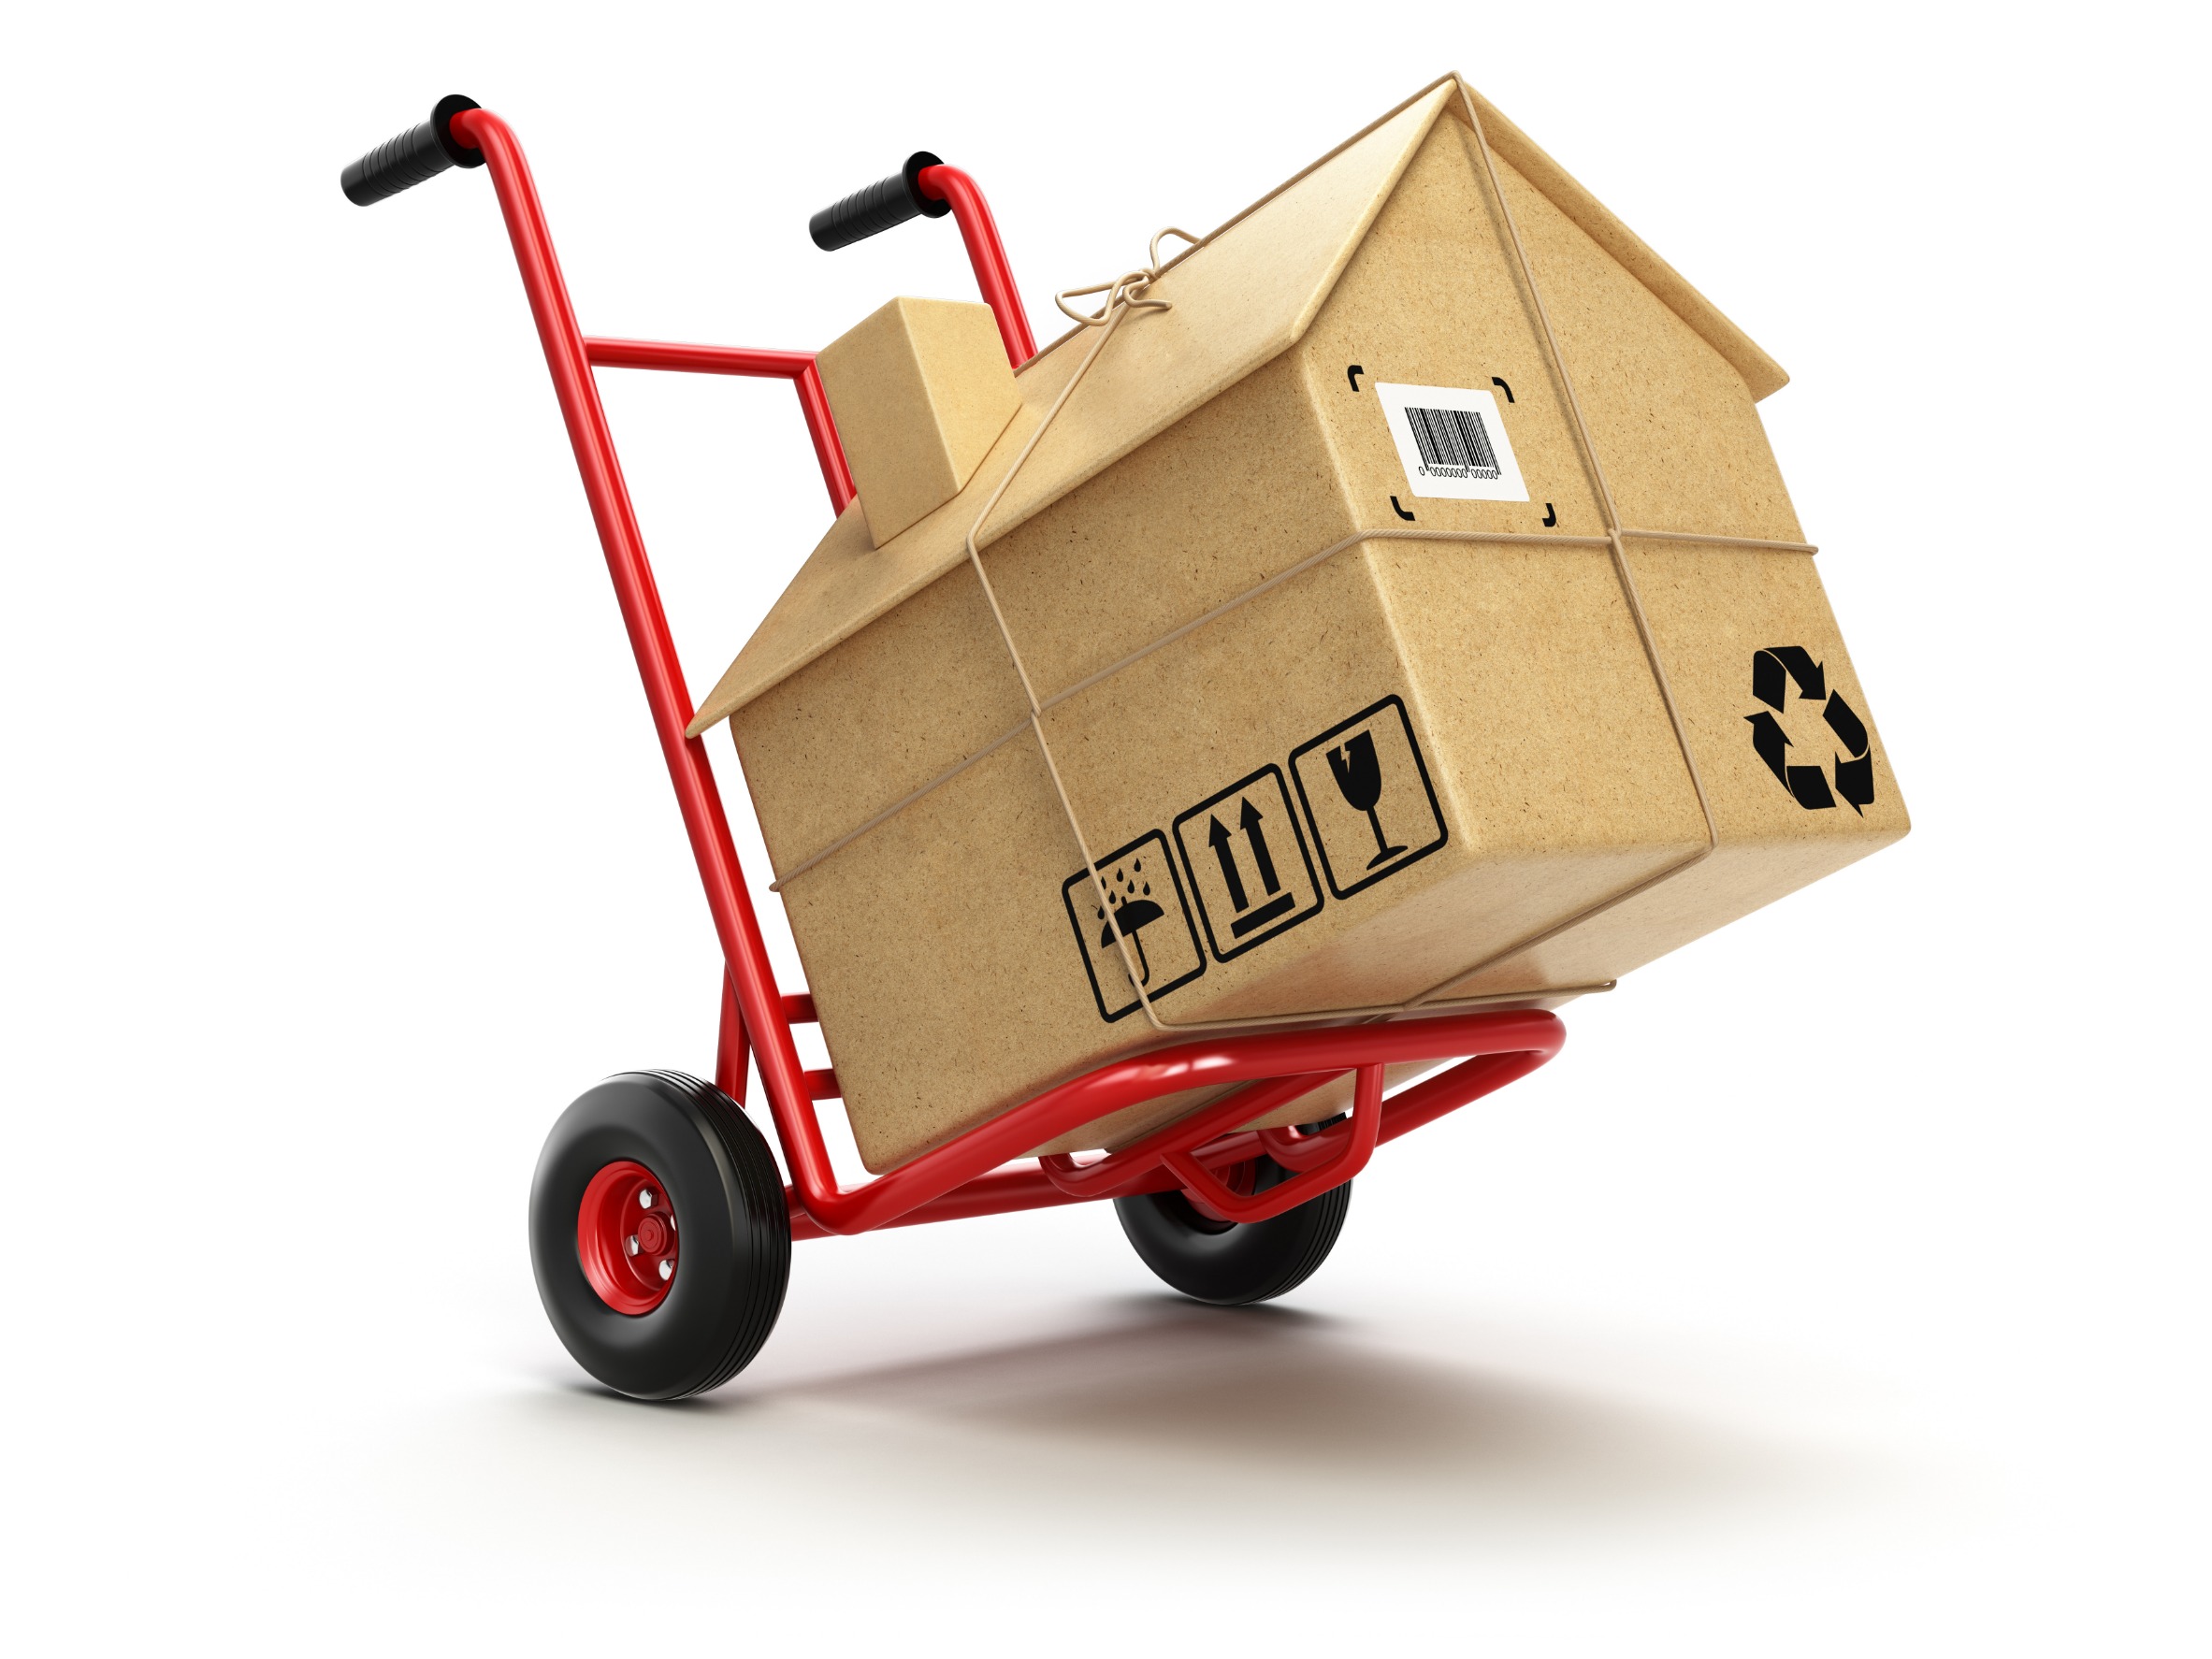 Town N Country FL Local Professional Movers